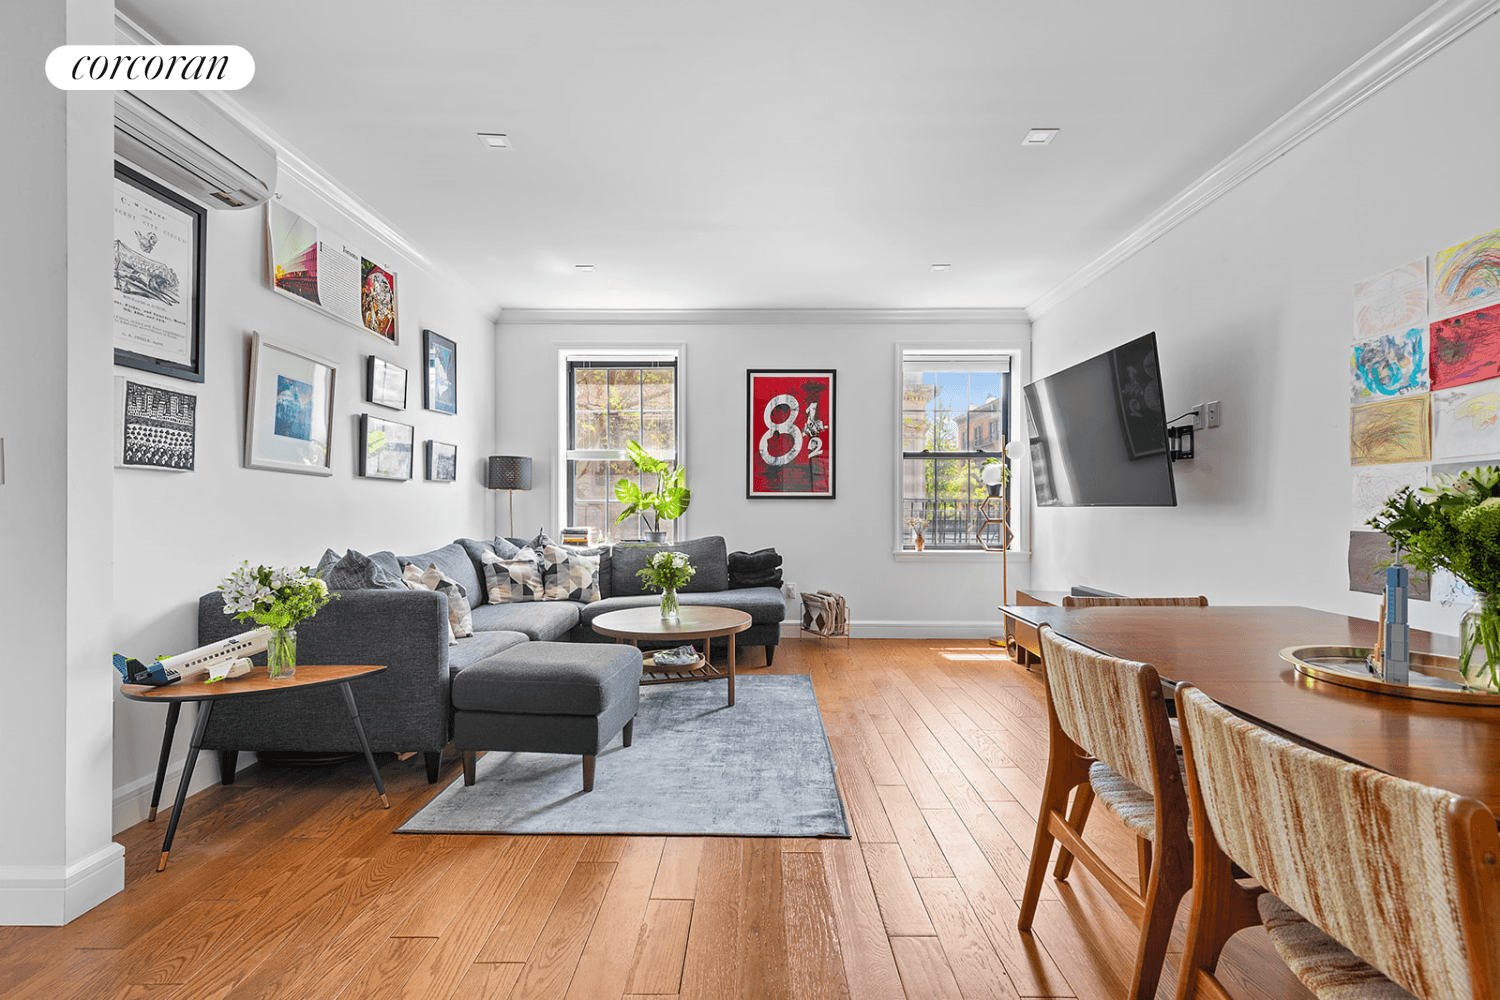 205 Hicks Street, 2A, Brooklyn, New York 11201New to the market Make this gorgeous, sophisticated three bedroom, two bath co op rental your new home !